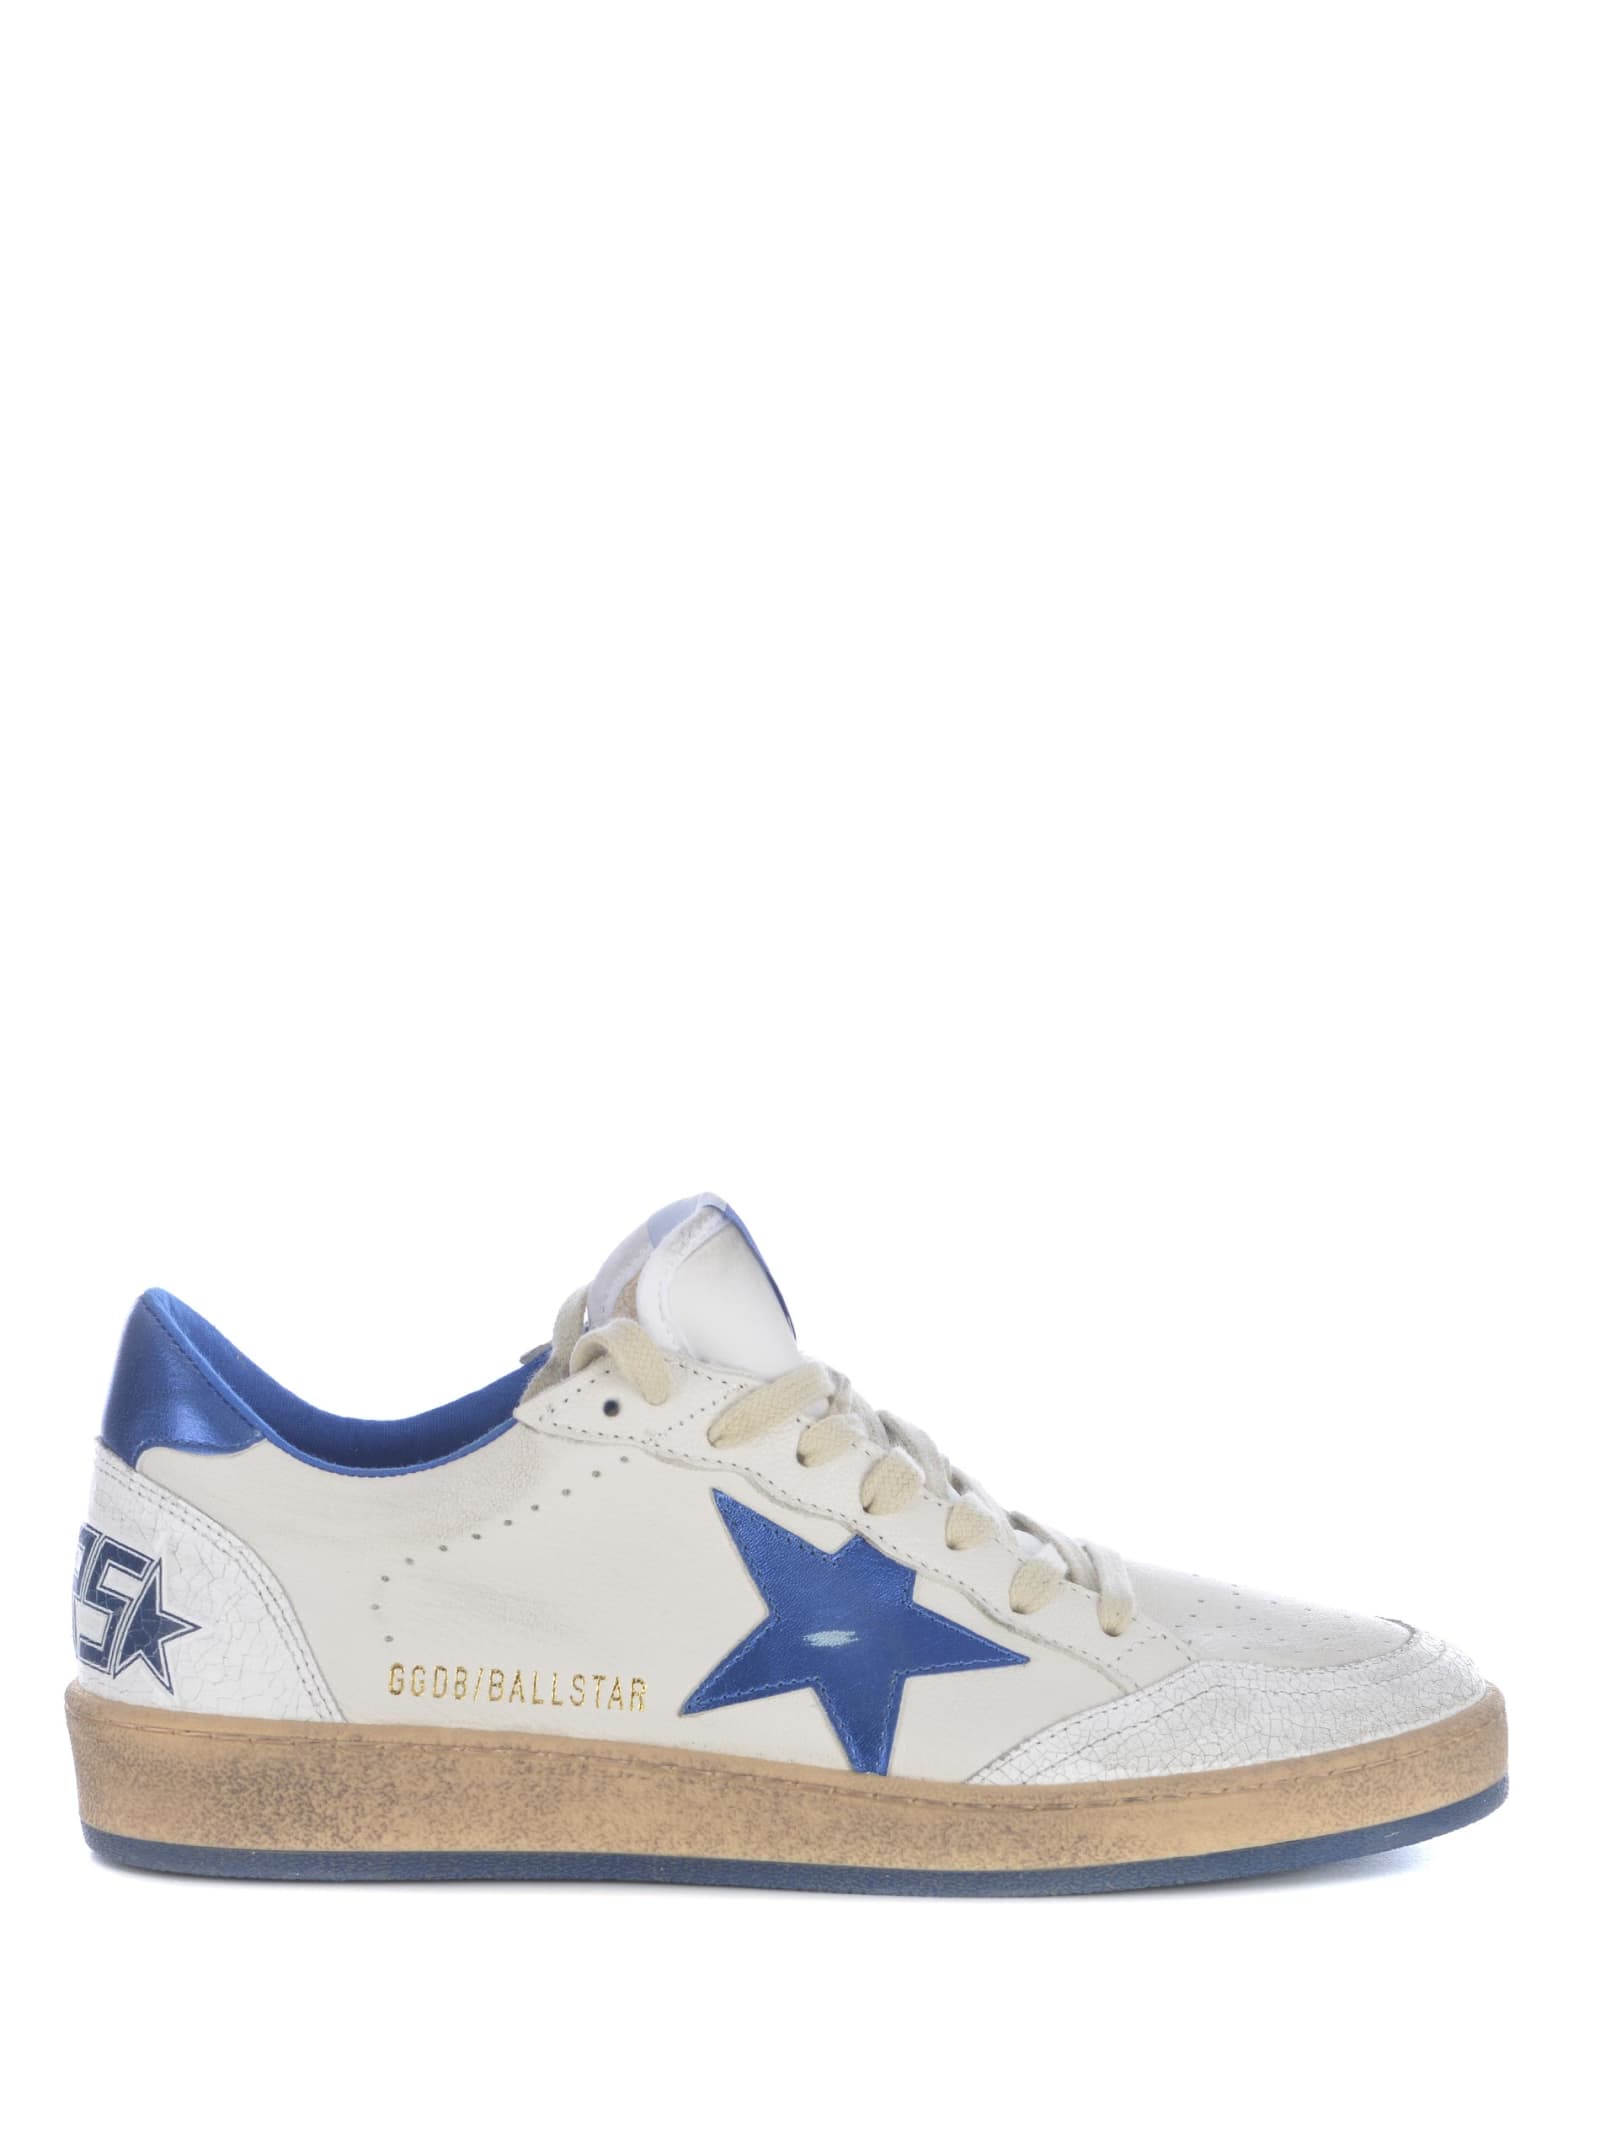 GOLDEN GOOSE SNEAKERS GOLDEN GOOSE BALL STAR MADE OF LEATHER